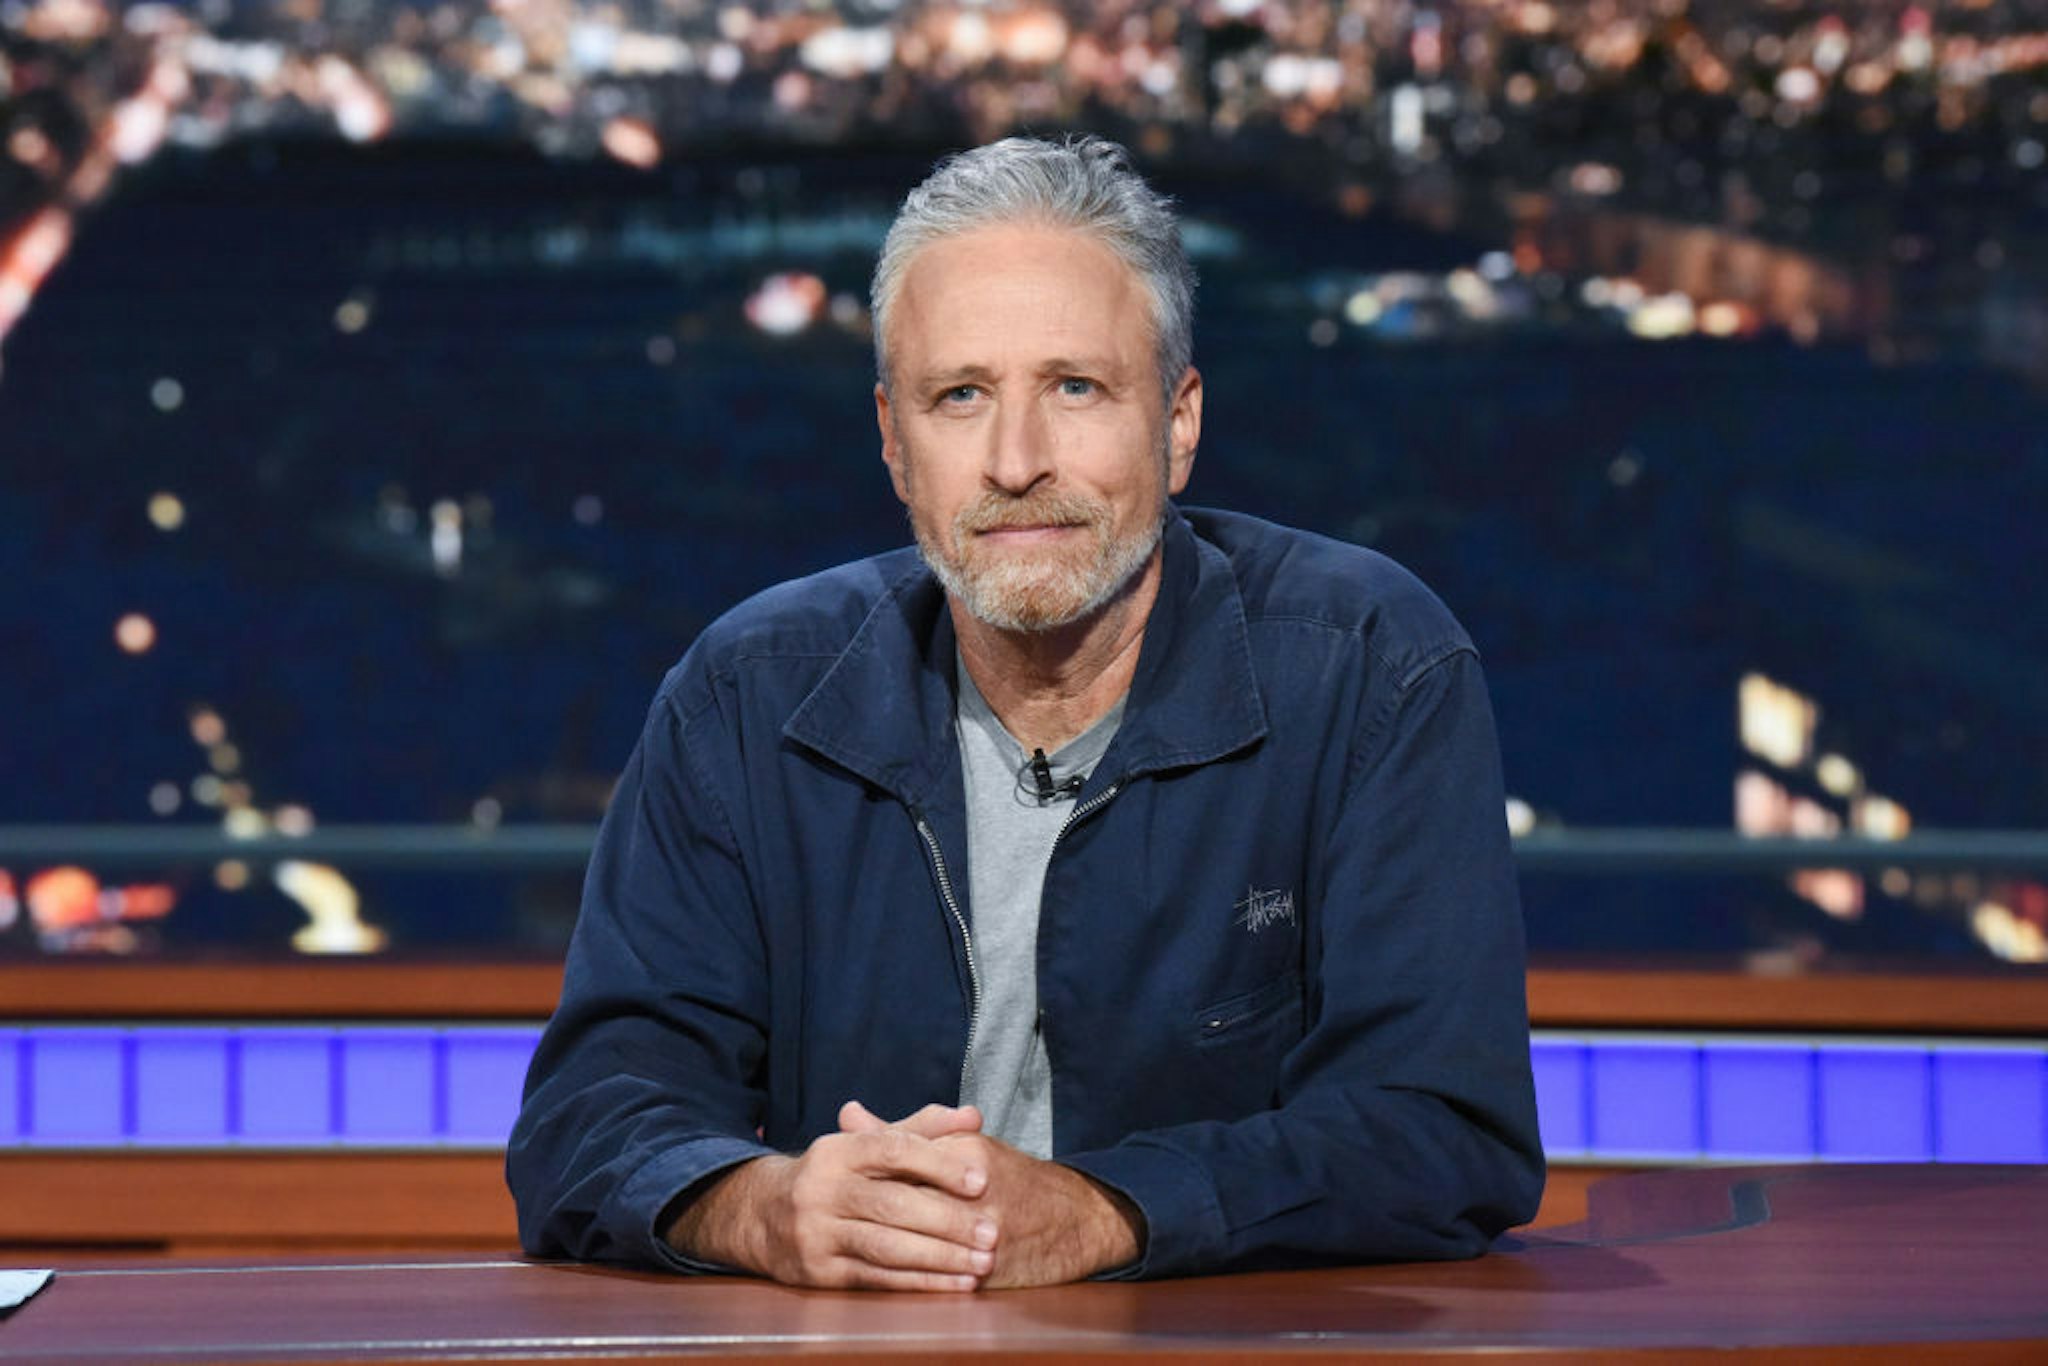 NEW YORK - JUNE 17: The Late Show with Stephen Colbert and guest Jon Stewart during Monday's June 17, 2019 show. (Photo by Scott Kowalchyk/CBS via Getty Images)